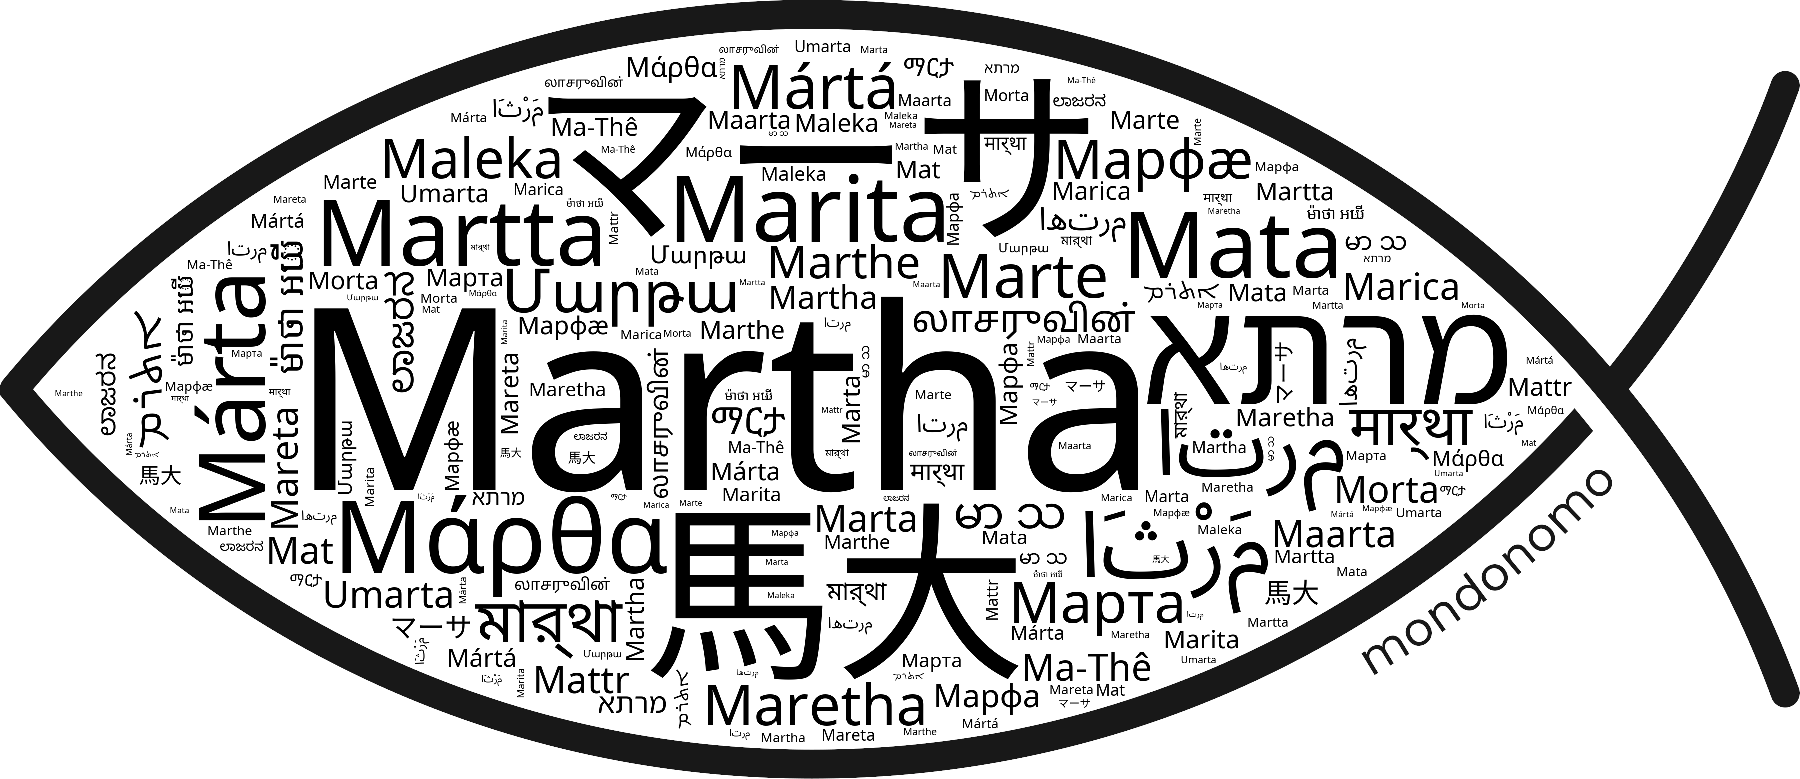 Name Martha in the world's Bibles